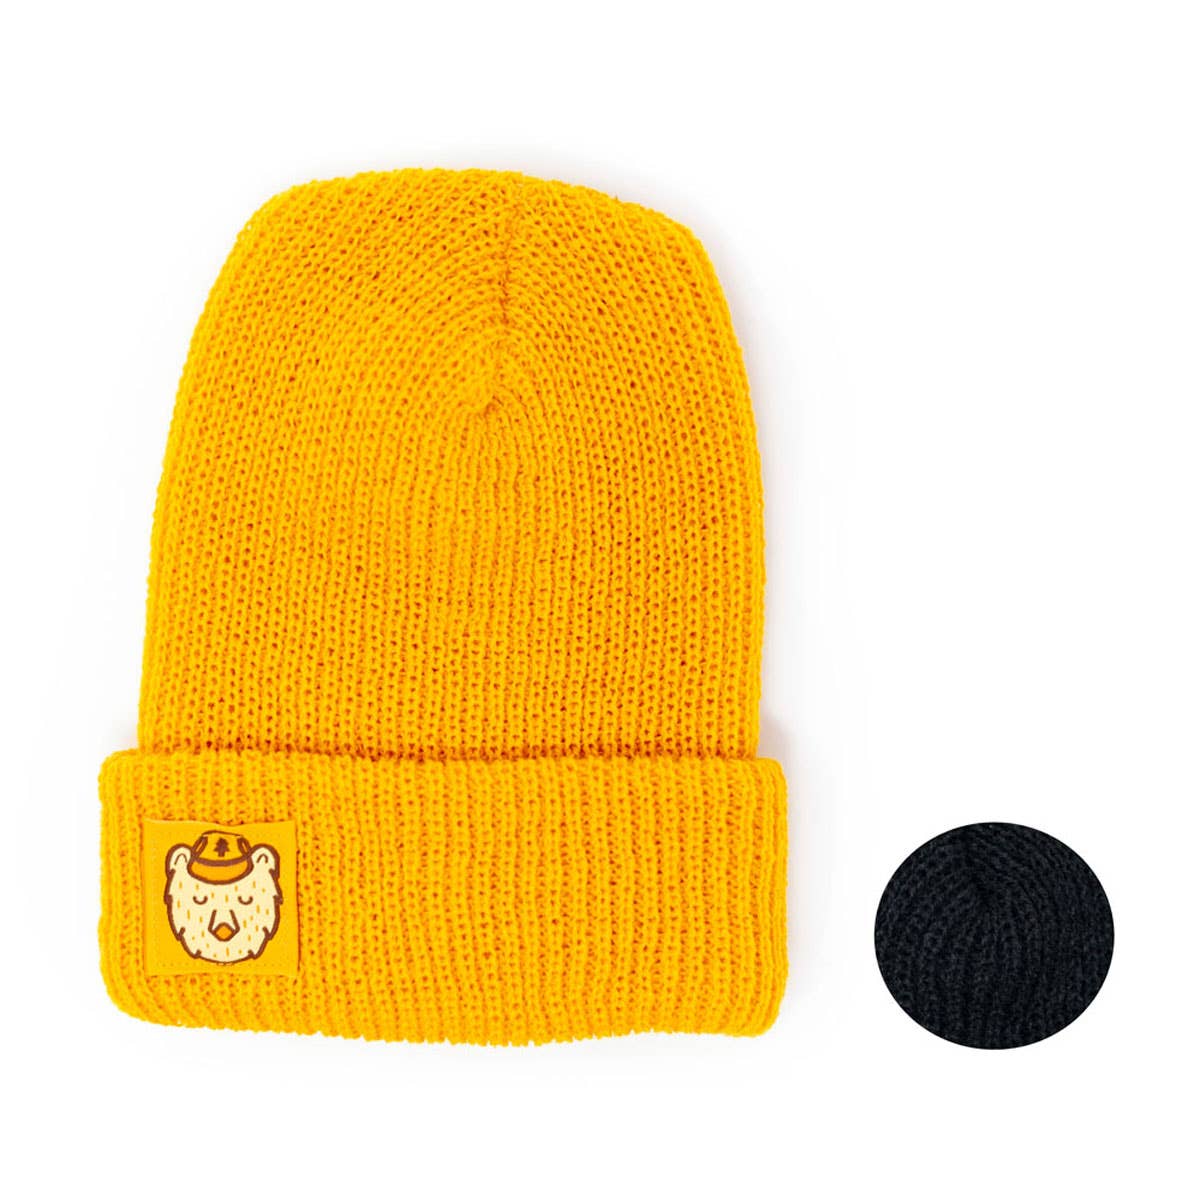 Mustard yellow or black ranger beanie from Ello There